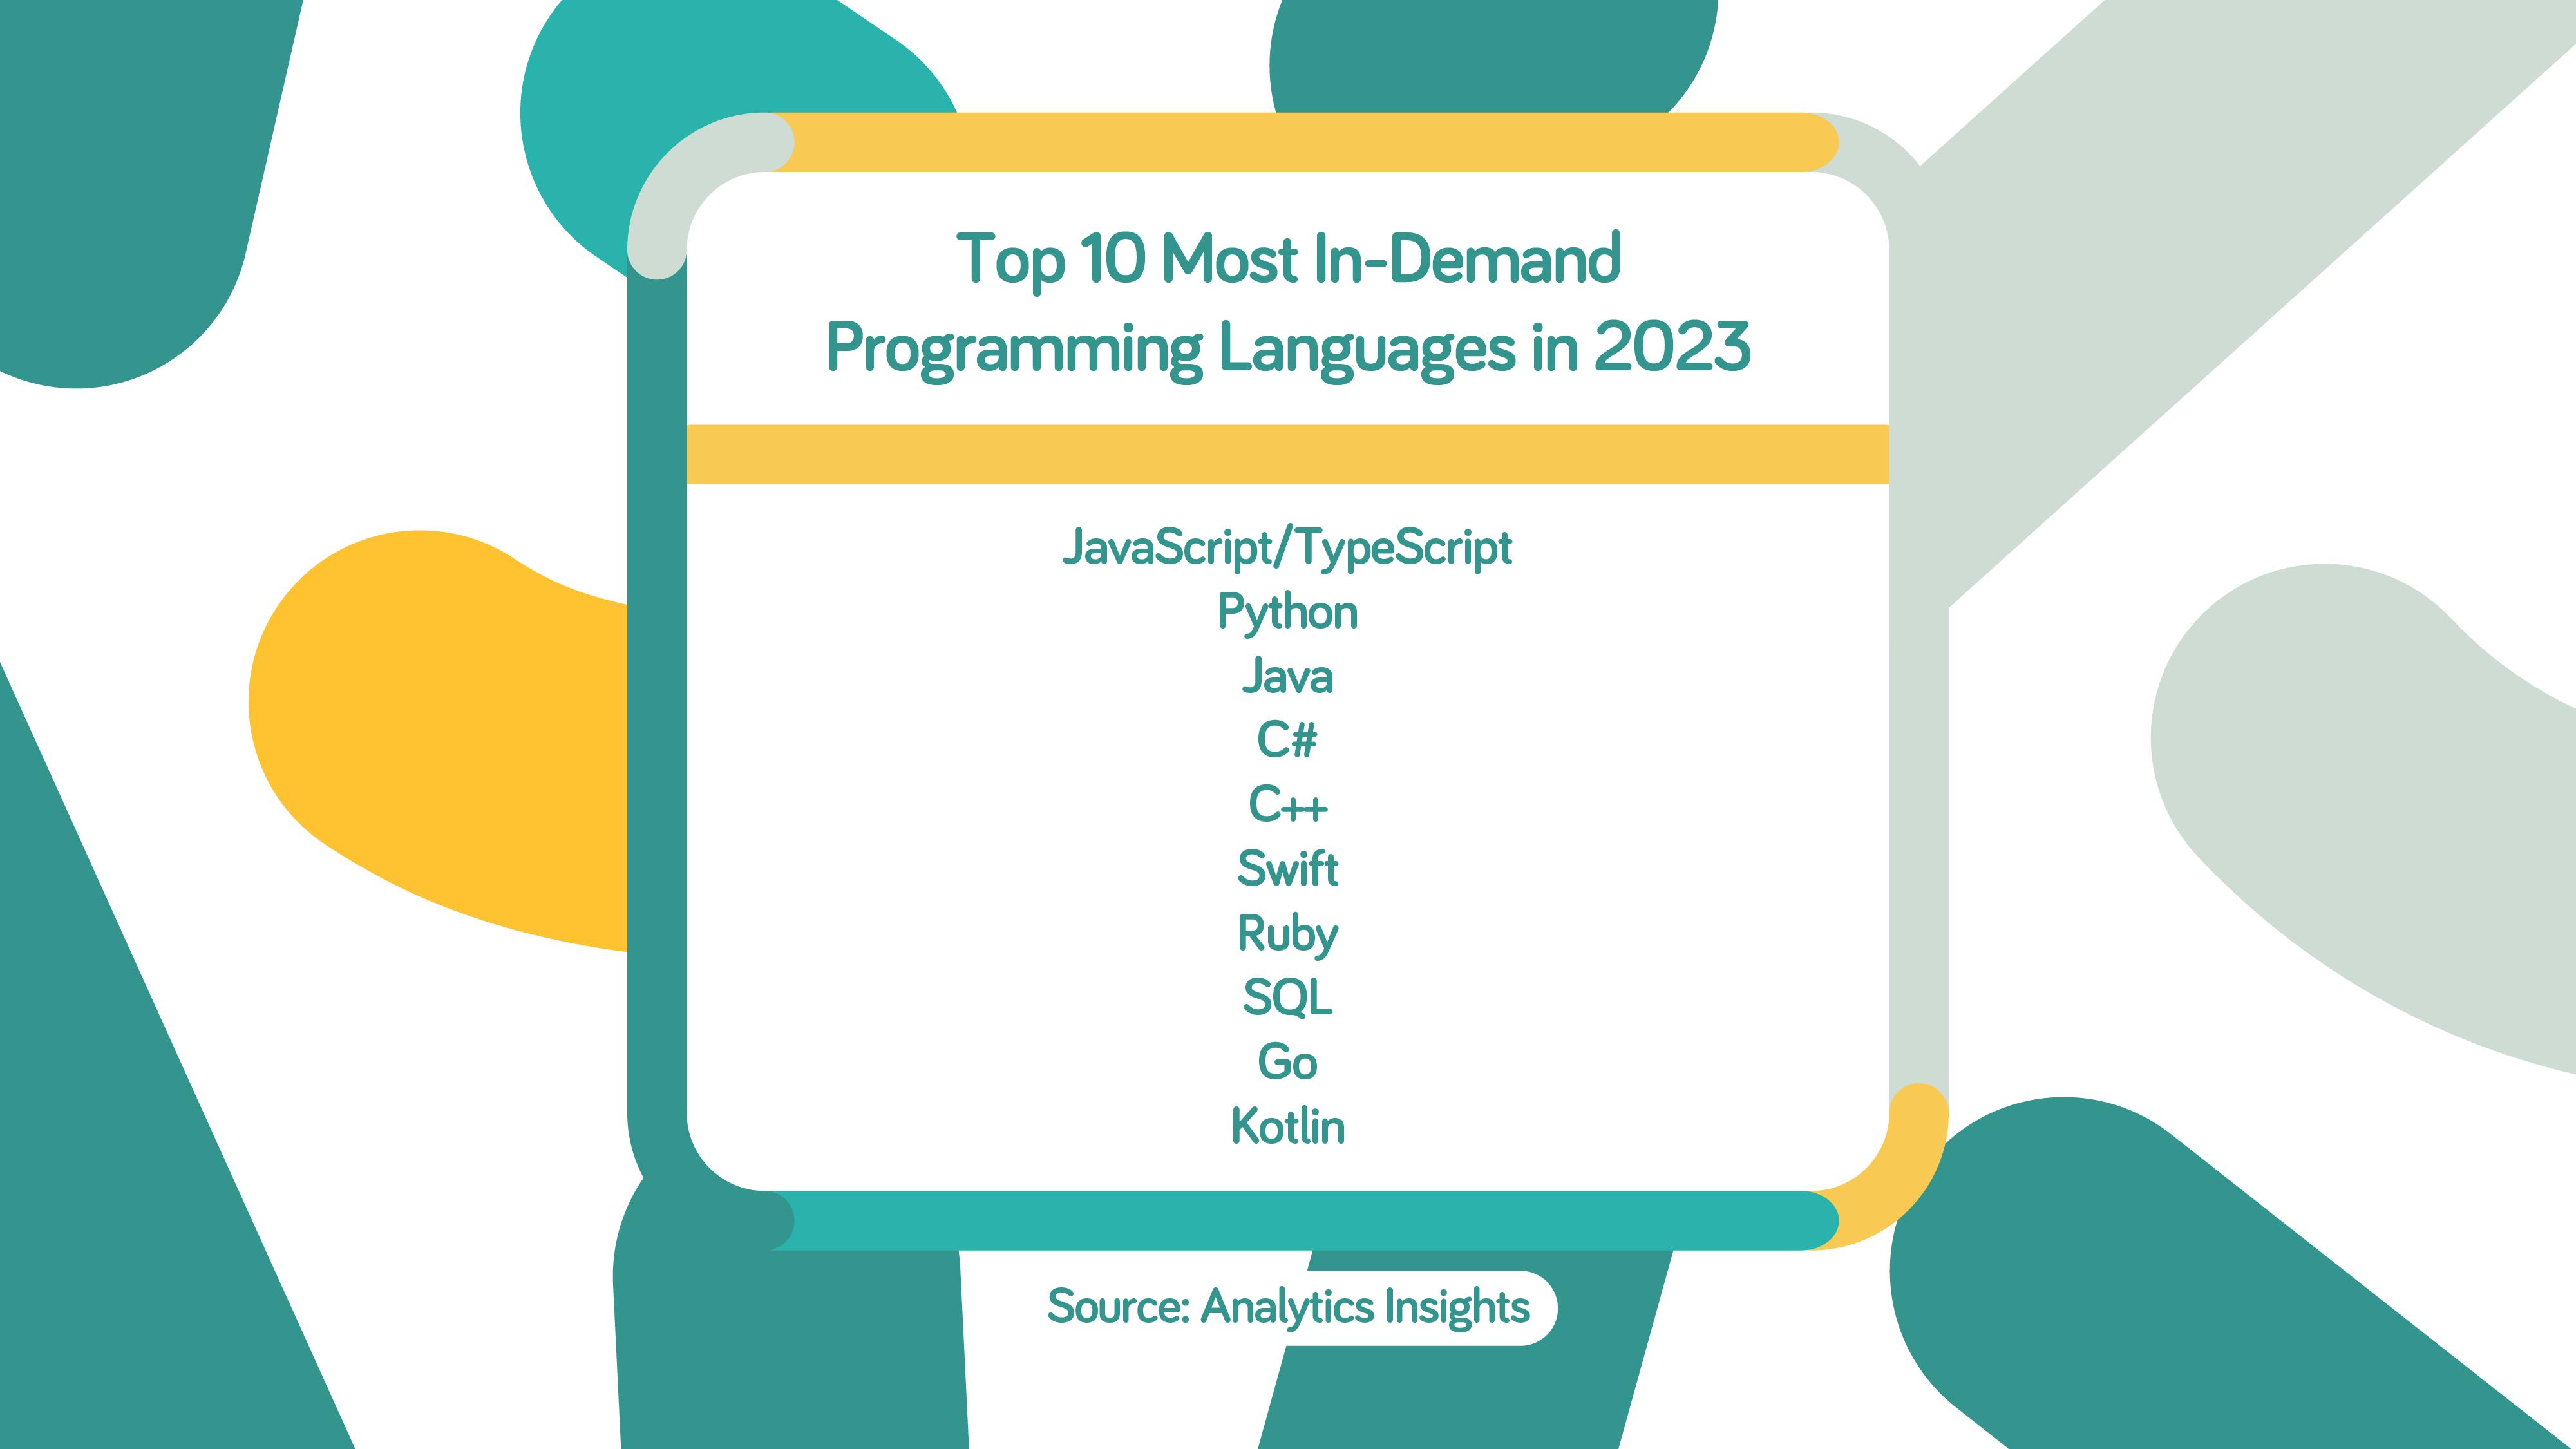 top 10 most in-demand programming languages in 2023